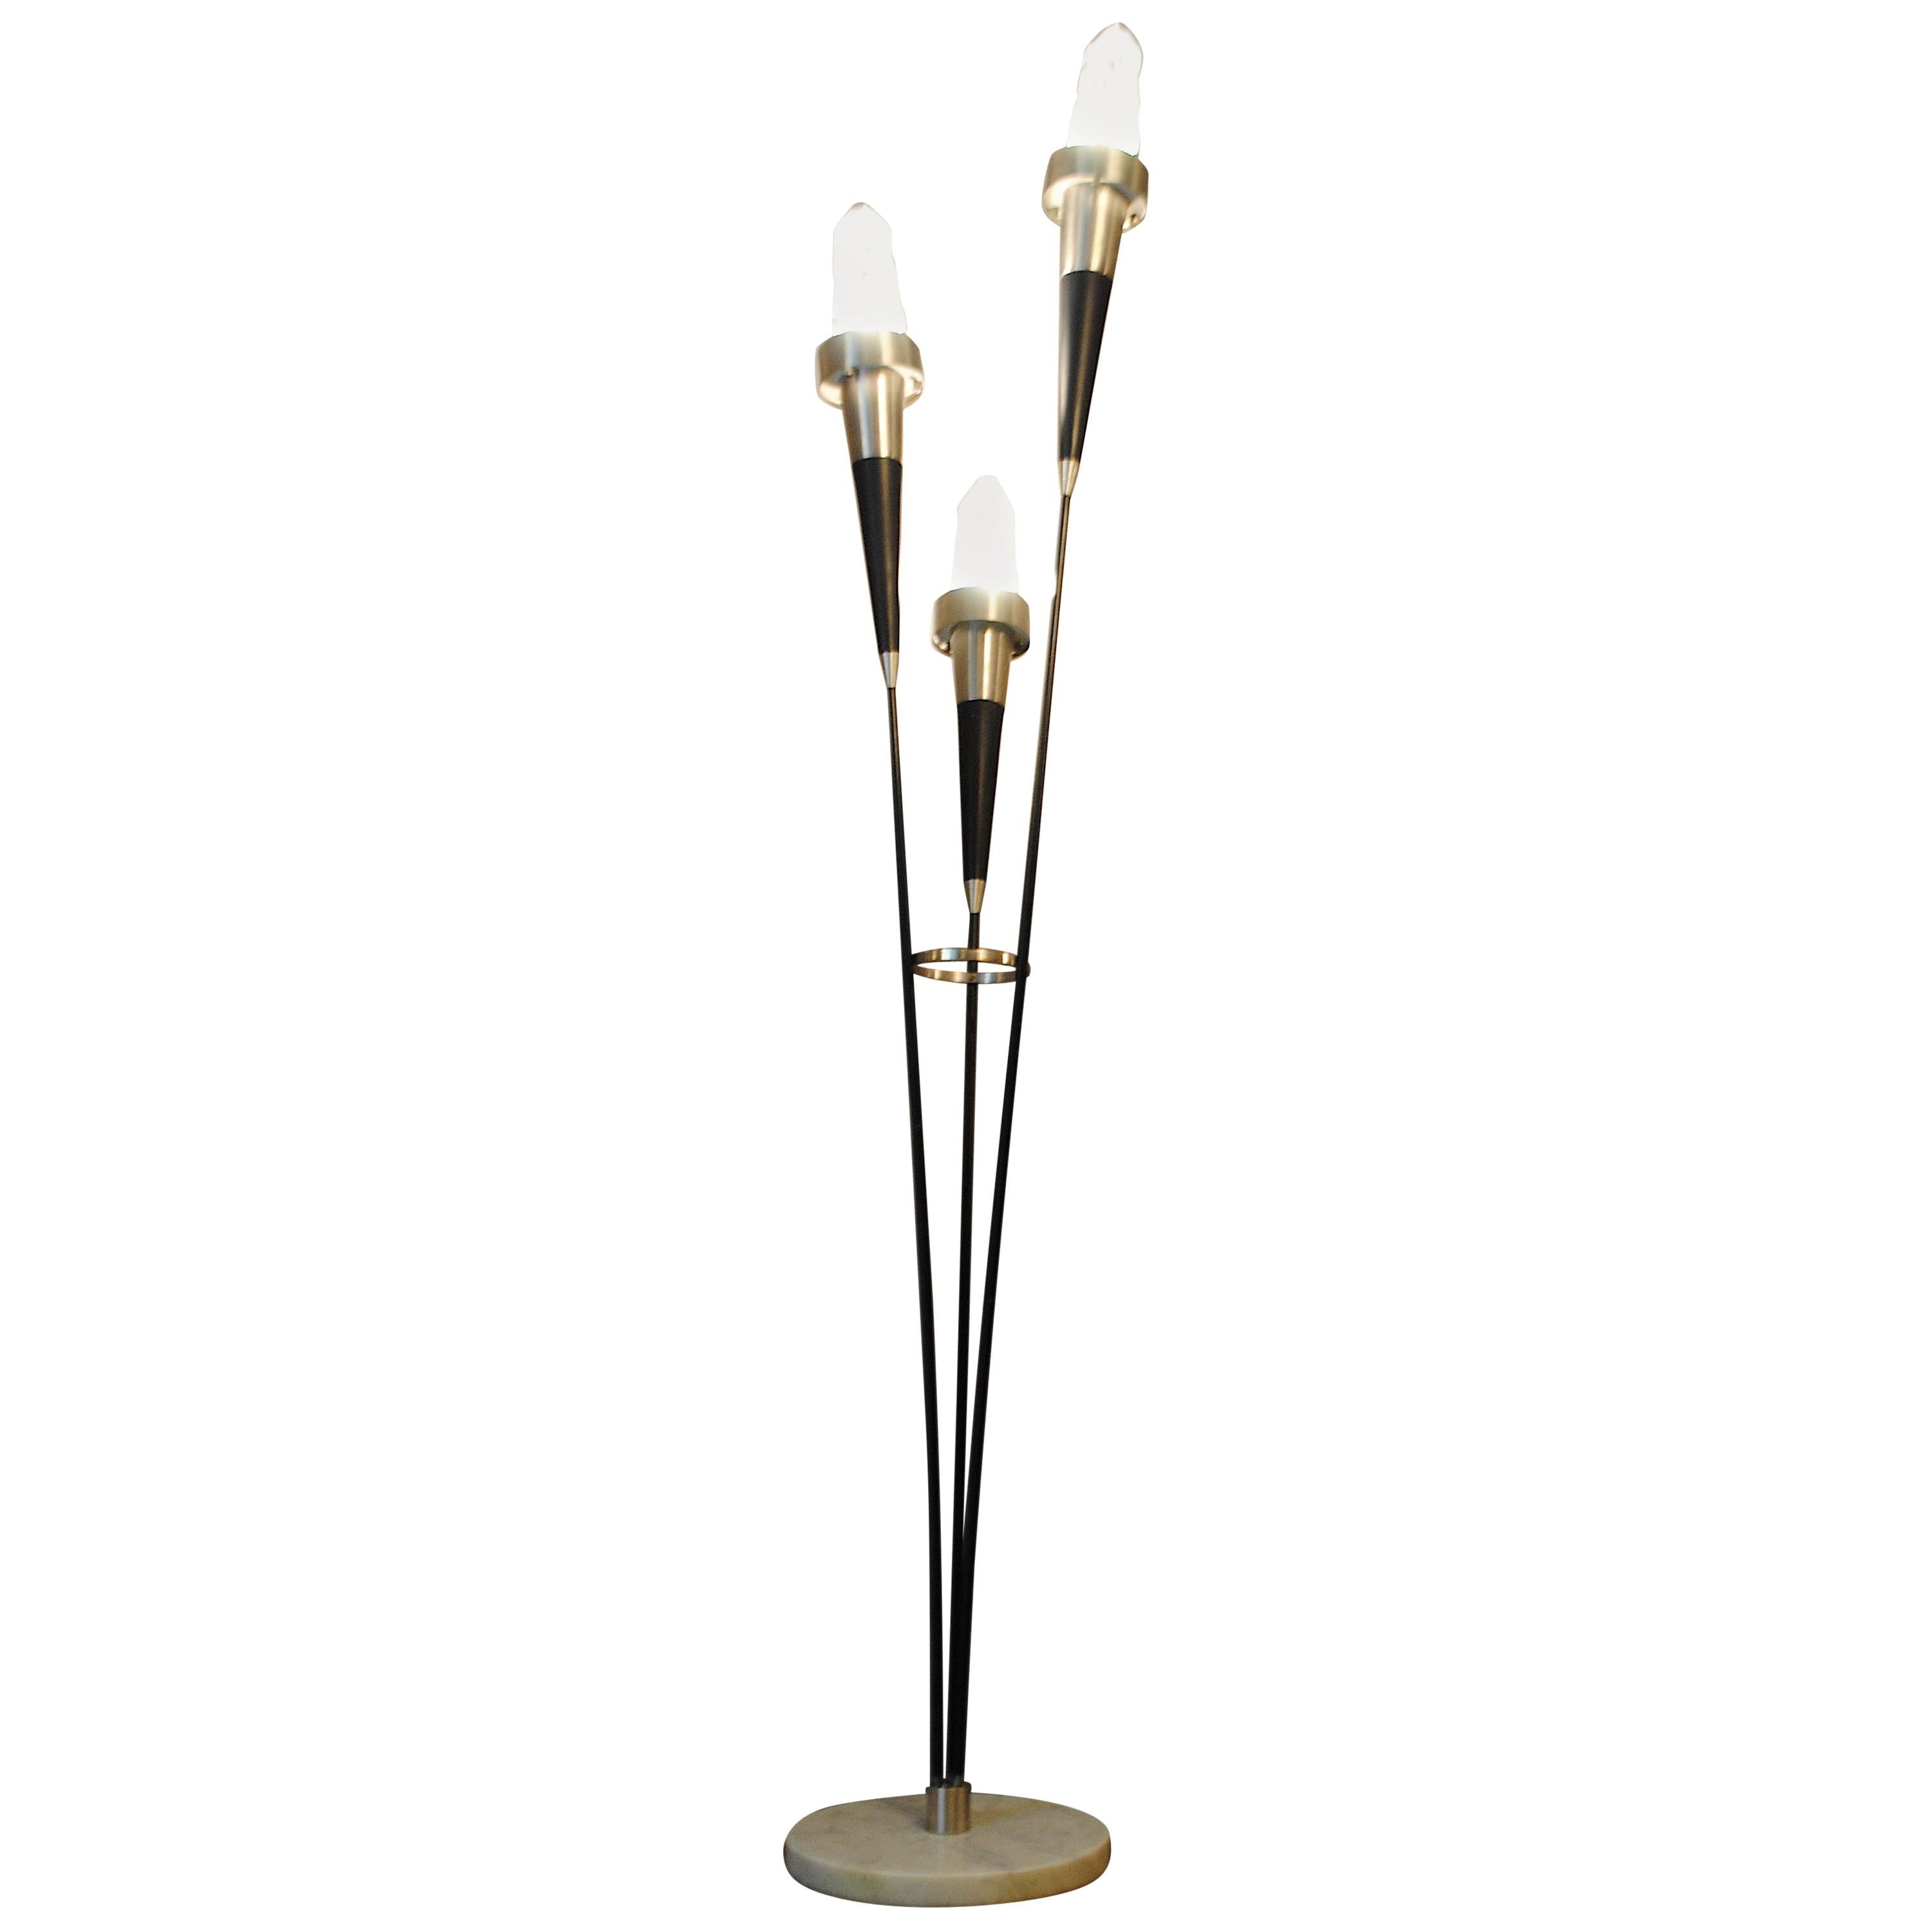 Stilnovo Floor Lamp, 1950s Production with Marble Base